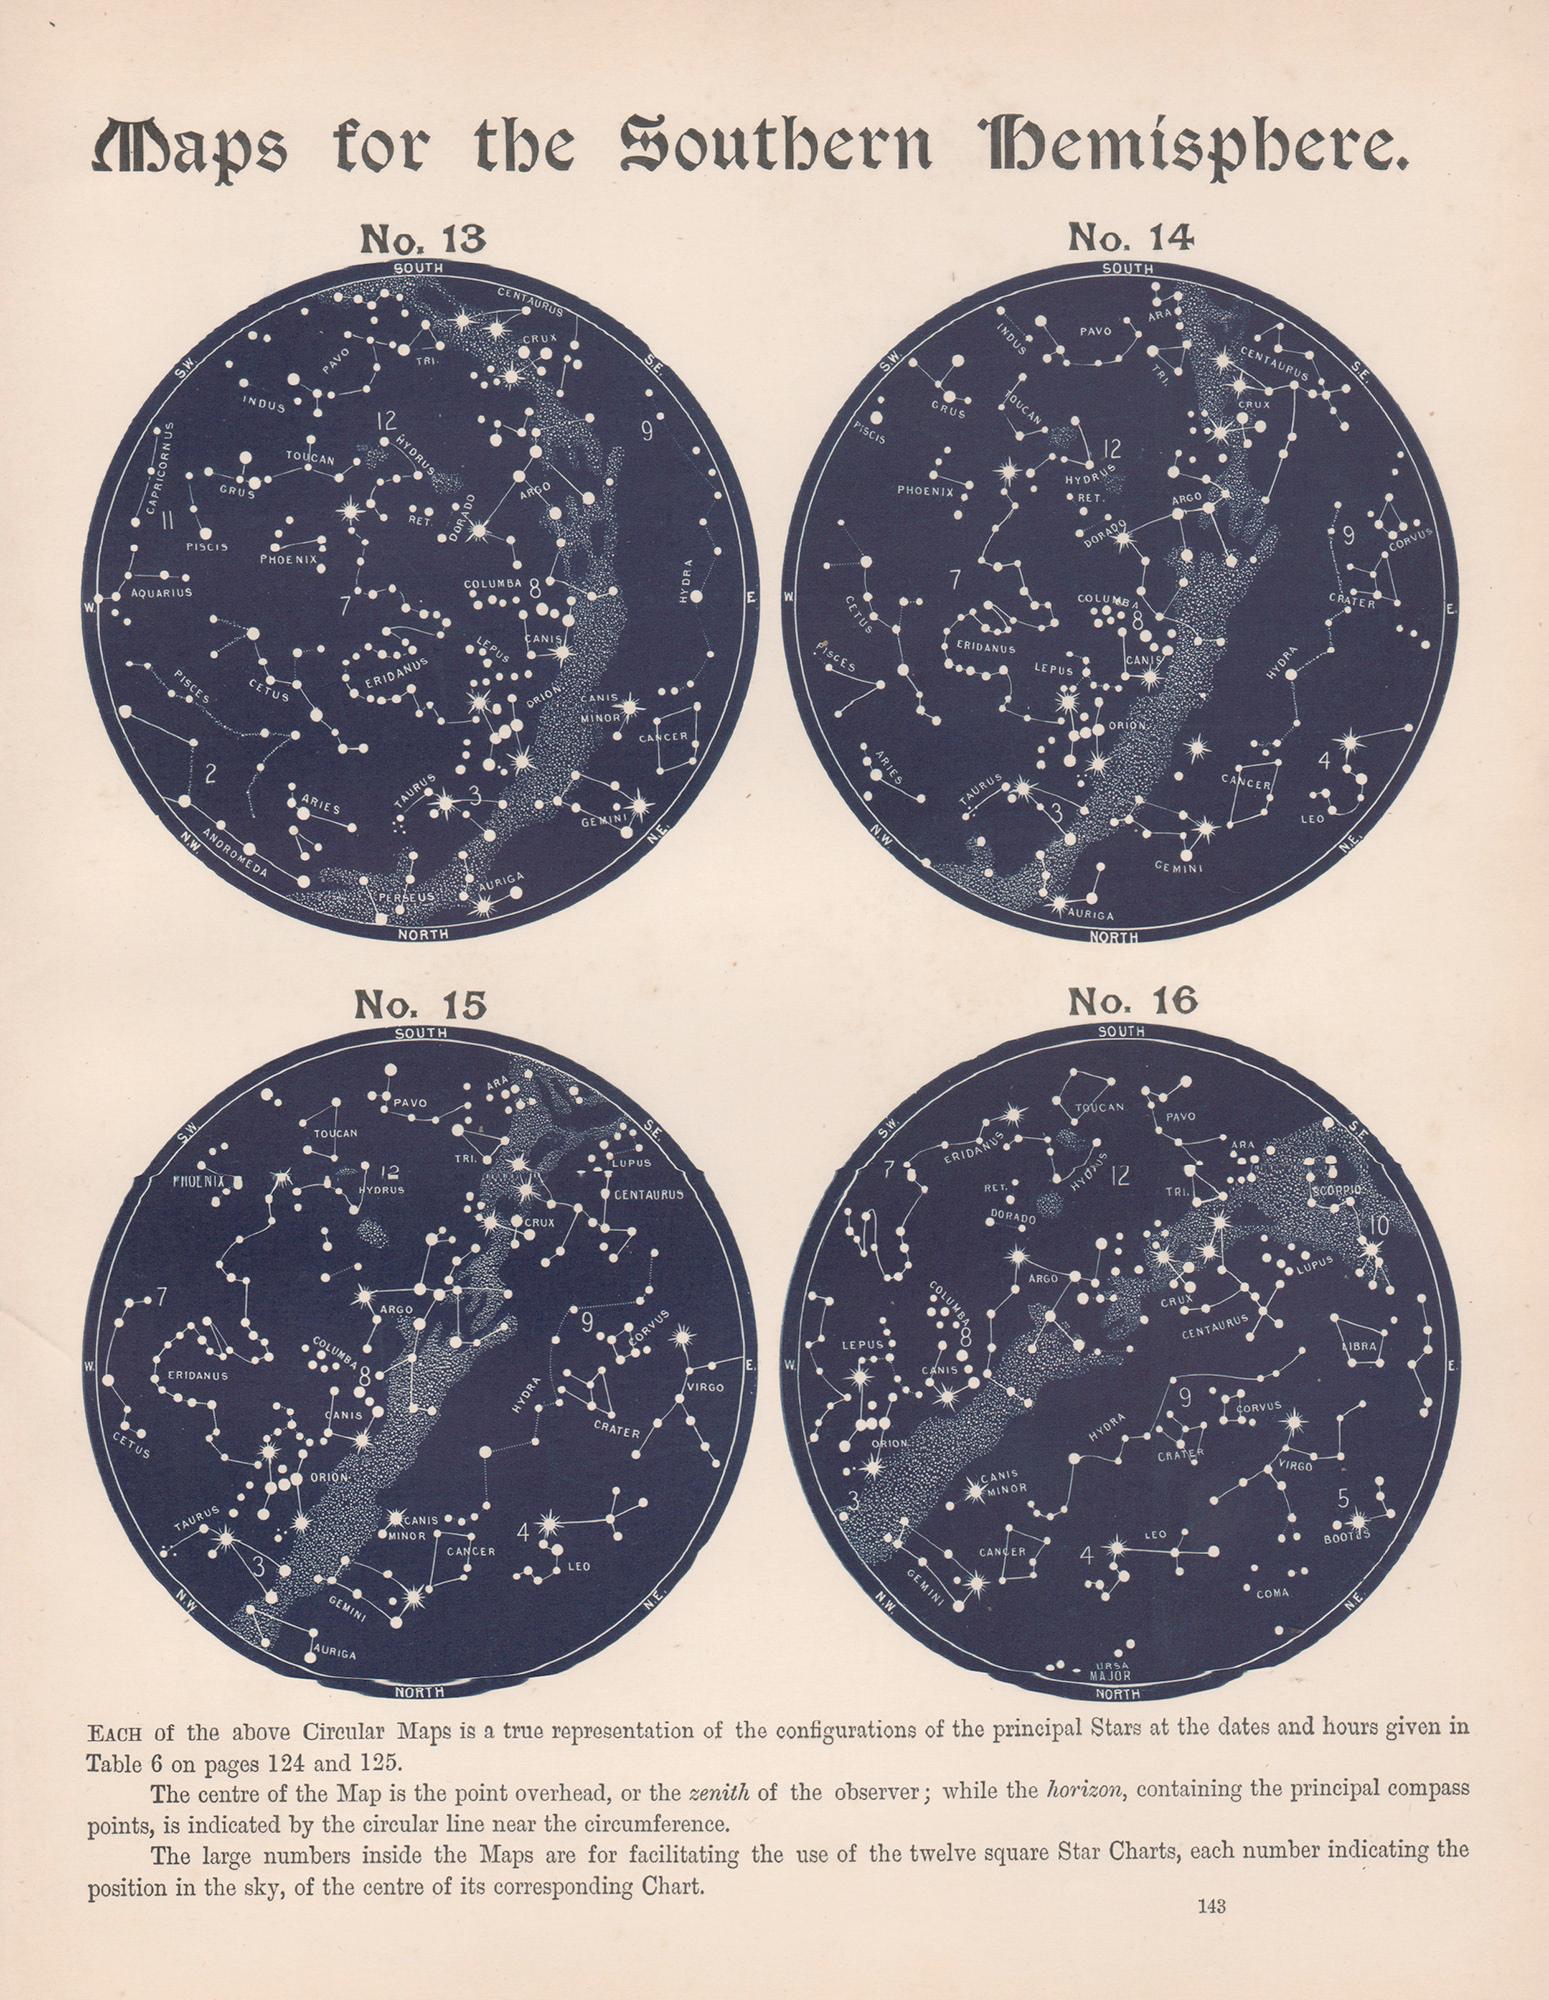 Maps for the Southern Hemisphere. Antique Astronomy star constellation print